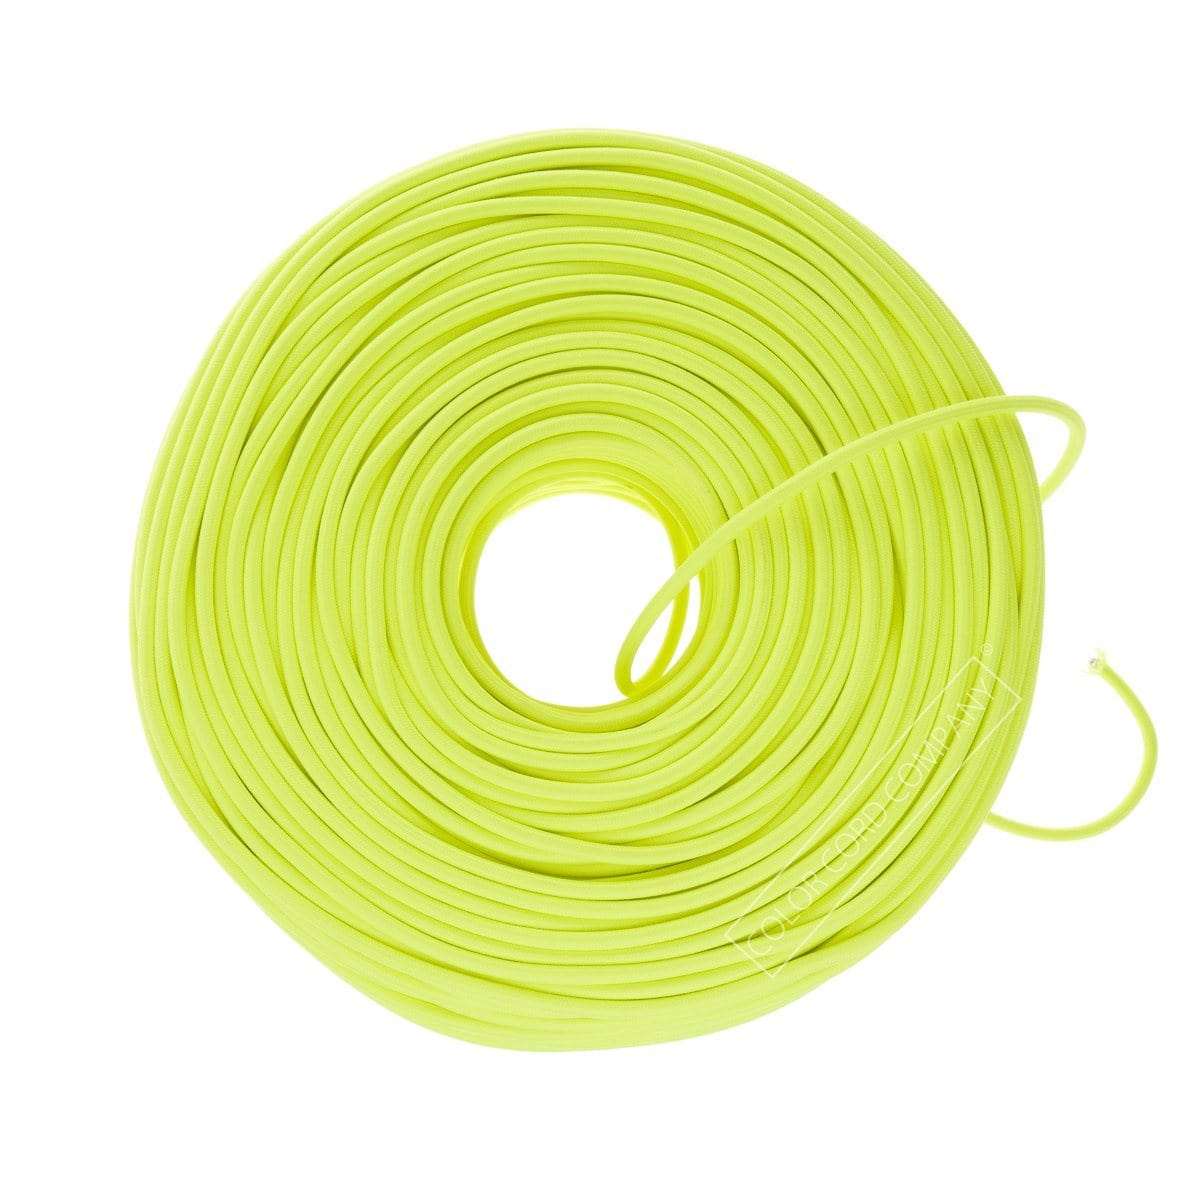 DIY Fabric Wire by the Foot - Neon Yellow